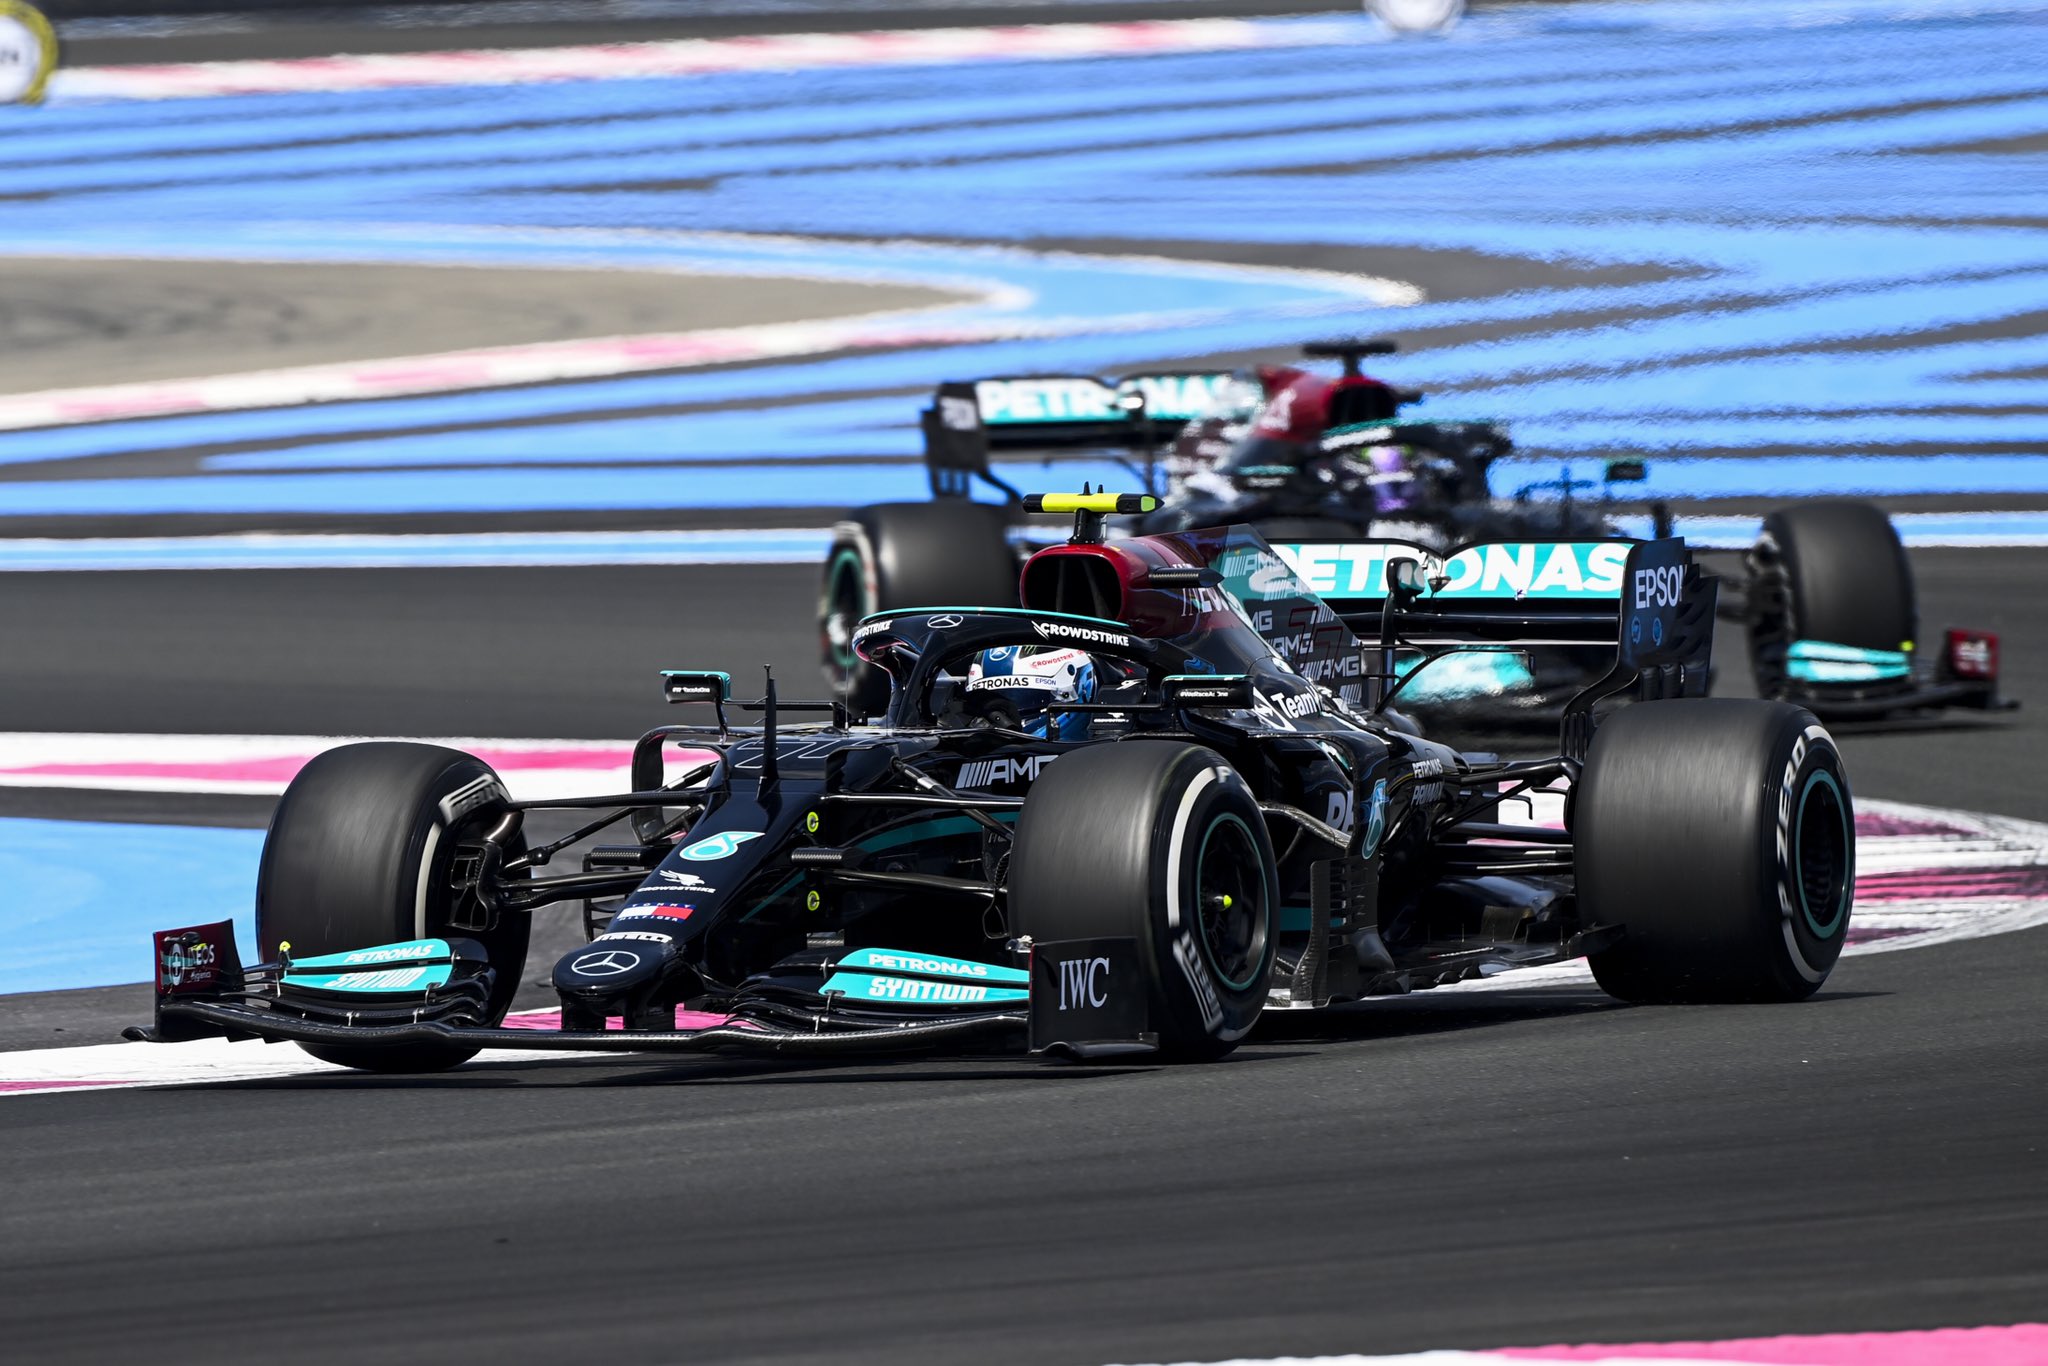 Mercedes come to their own dominant ways at French GP practice session